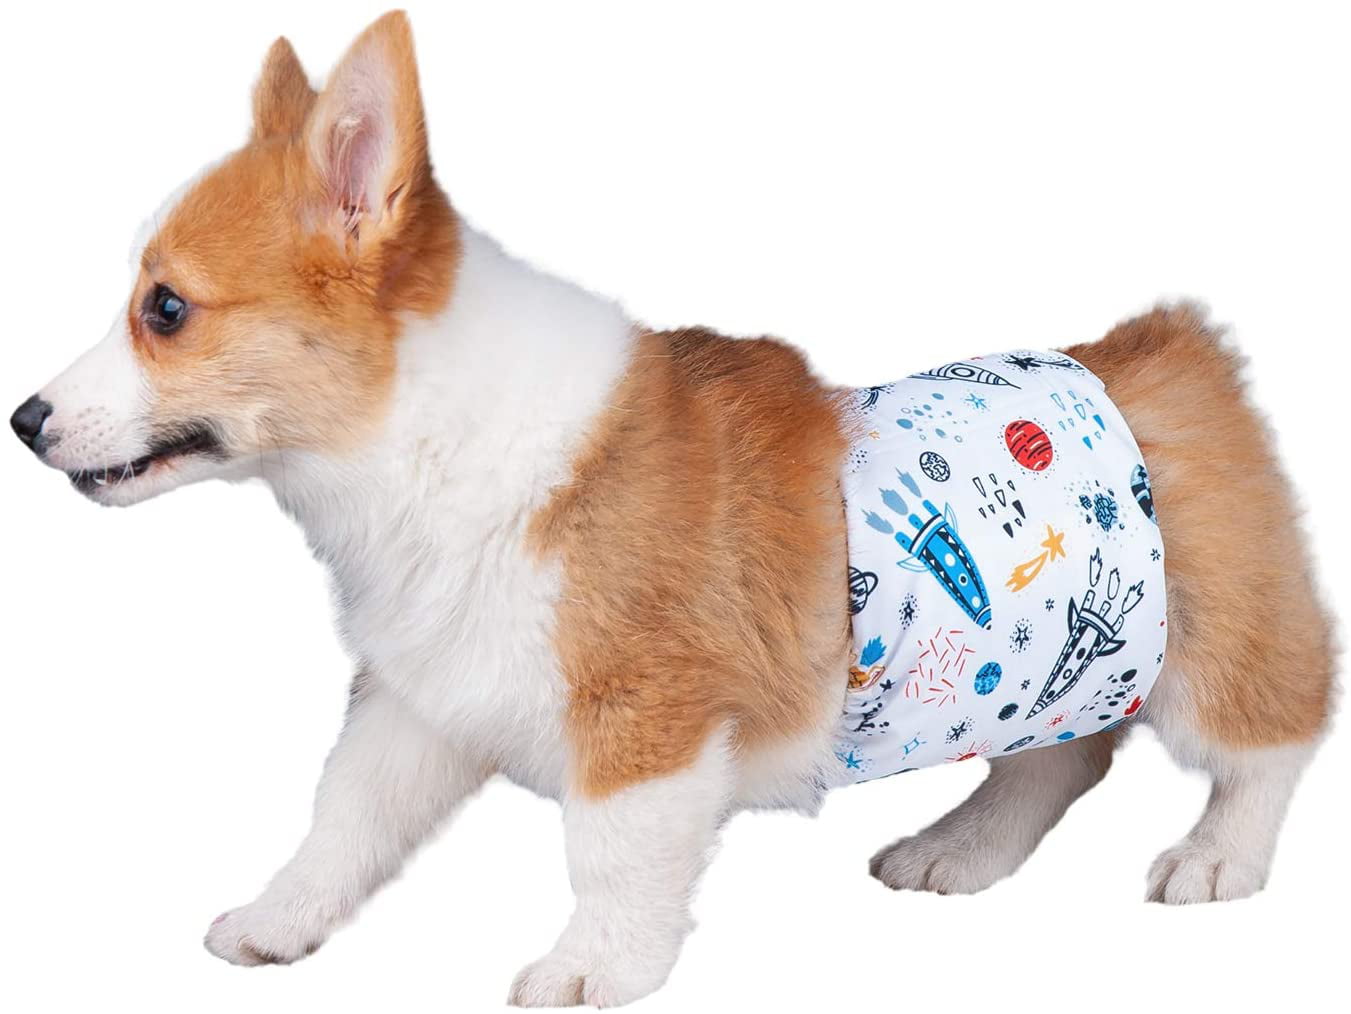 Comfort Reusable Male Dog Belly Wraps Diapers for Doggy Puppies Pet Soft Washable Belly Bands L, Space Pack of 3 - 2021 Latest Washable Male Dog Diapers